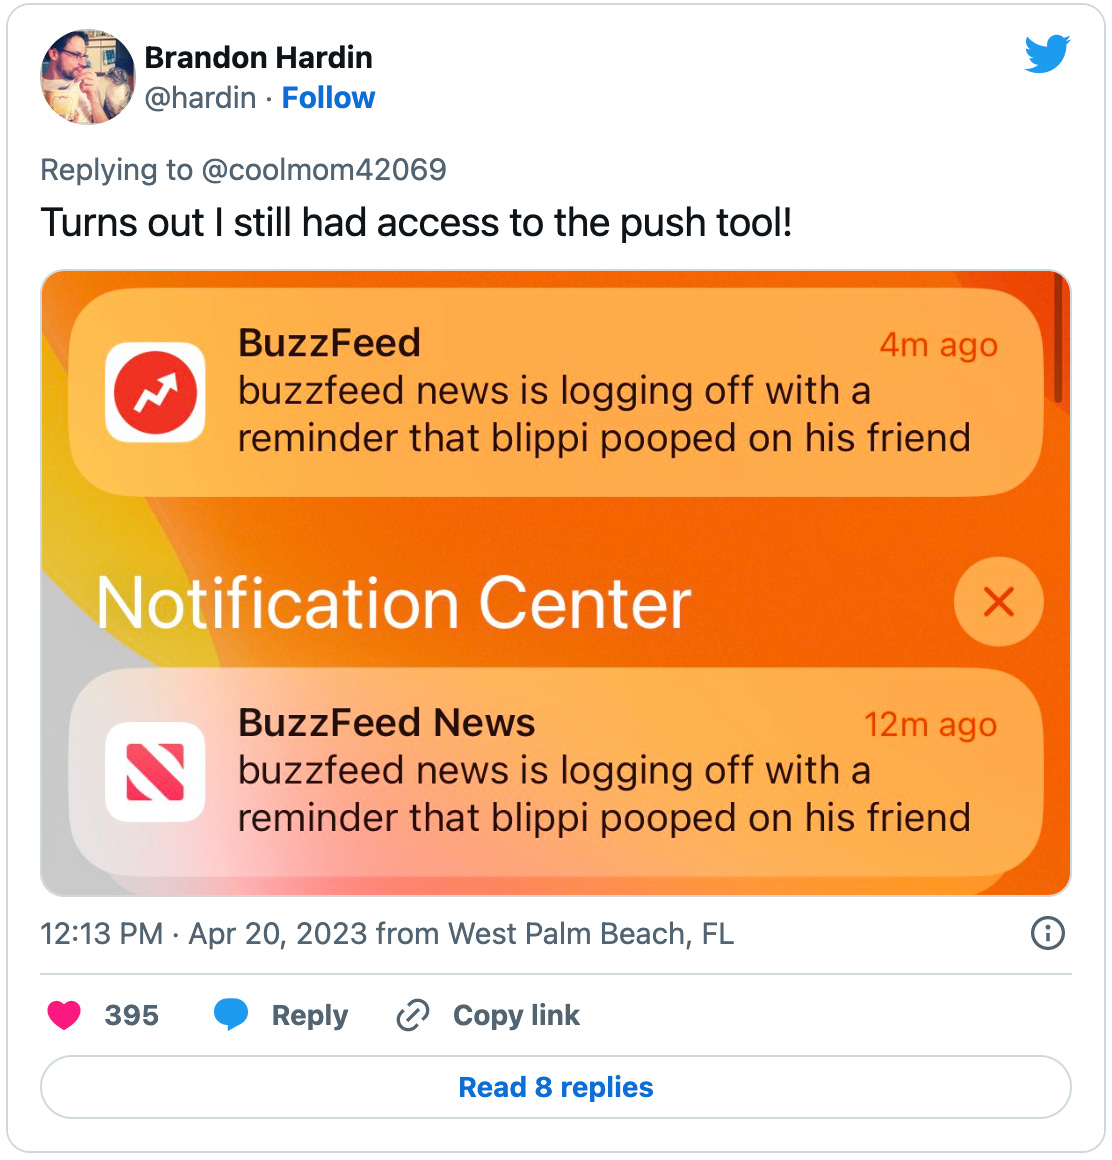 Tweet by Brandon Hardin: “Turns out I still had access to the push tool!” with a screenshot of BuzzFeed and BuzzFeed News push alerts that say “buzzfeed news is logging off with a reminder that blippi pooped on his friend”